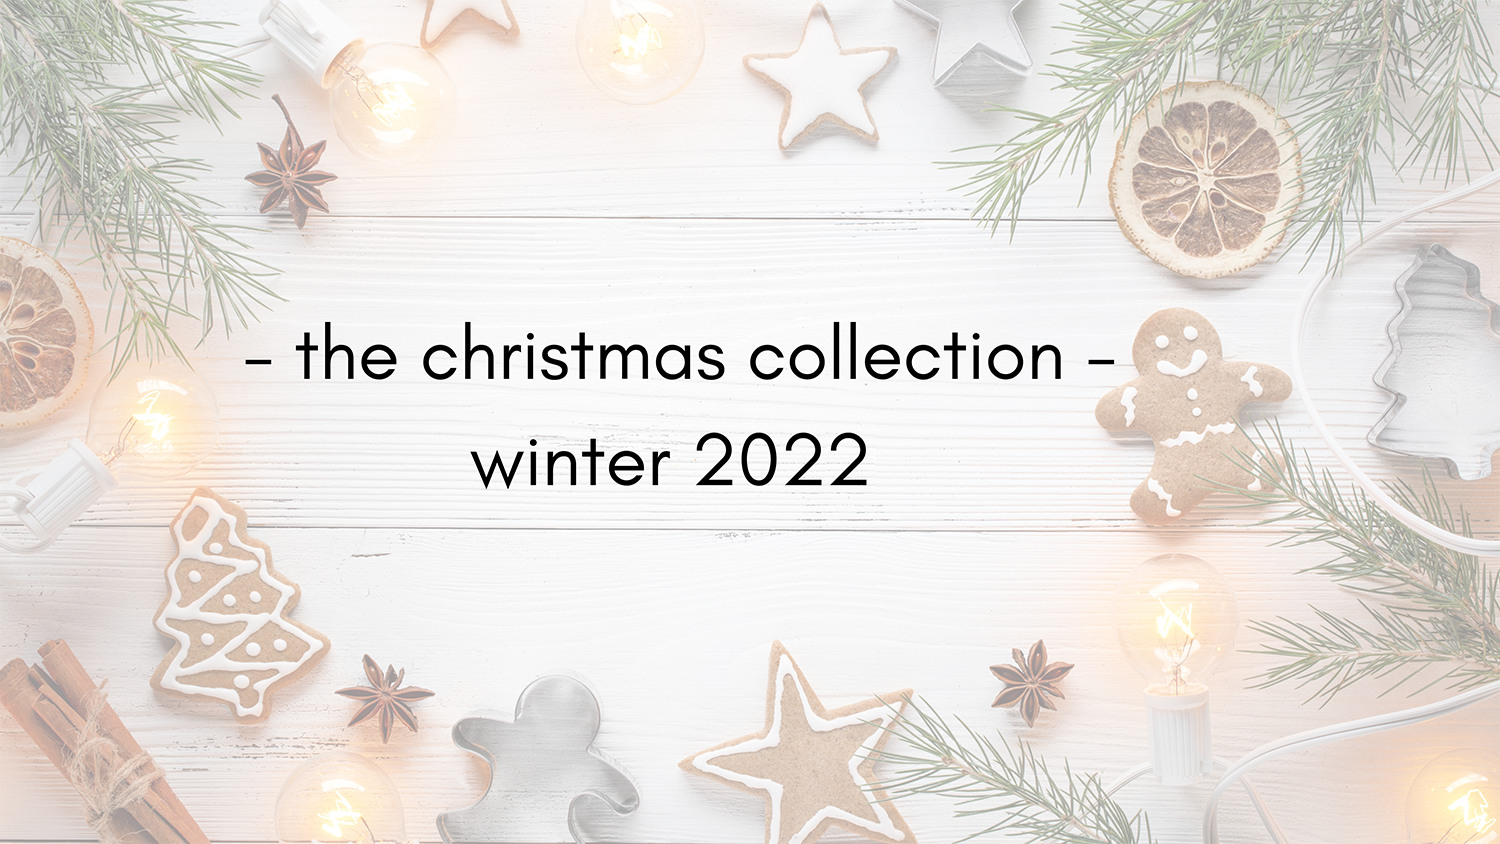 carl mullaney london - christmas collection 2022